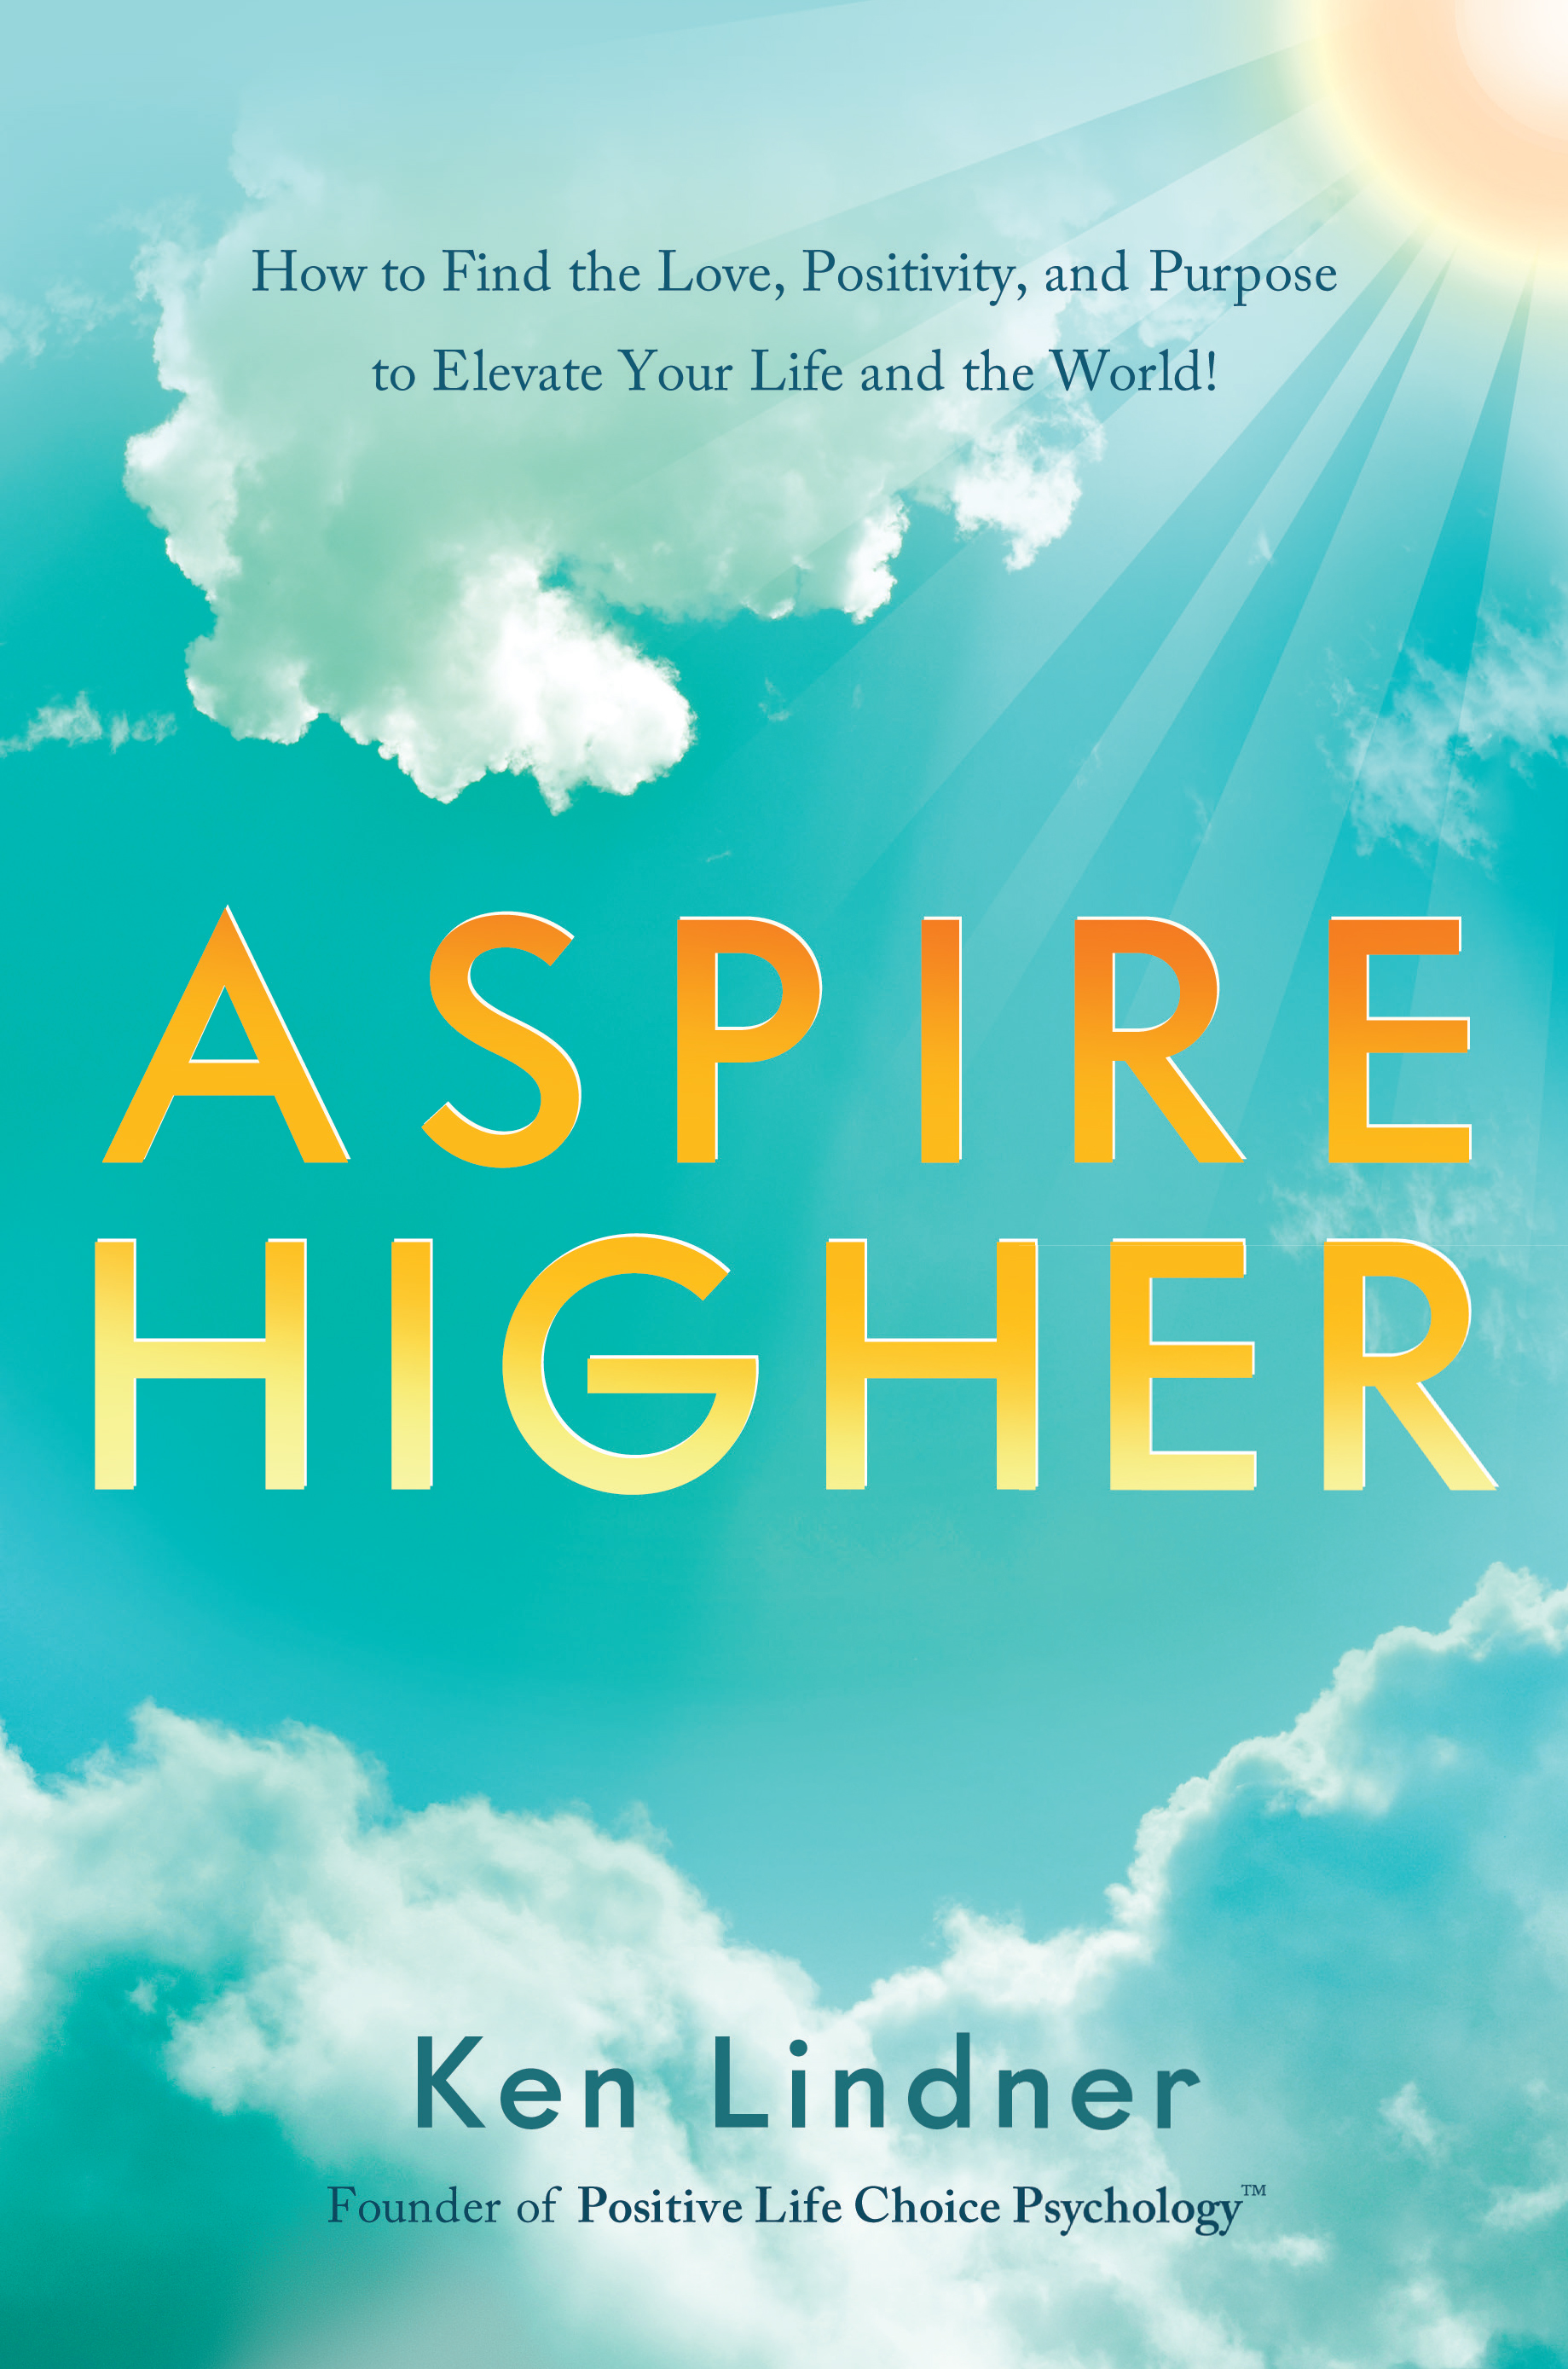 Aspire Higher How to Find the Love, Positivity, and Purpose to Elevate Your Life and the World! cover image